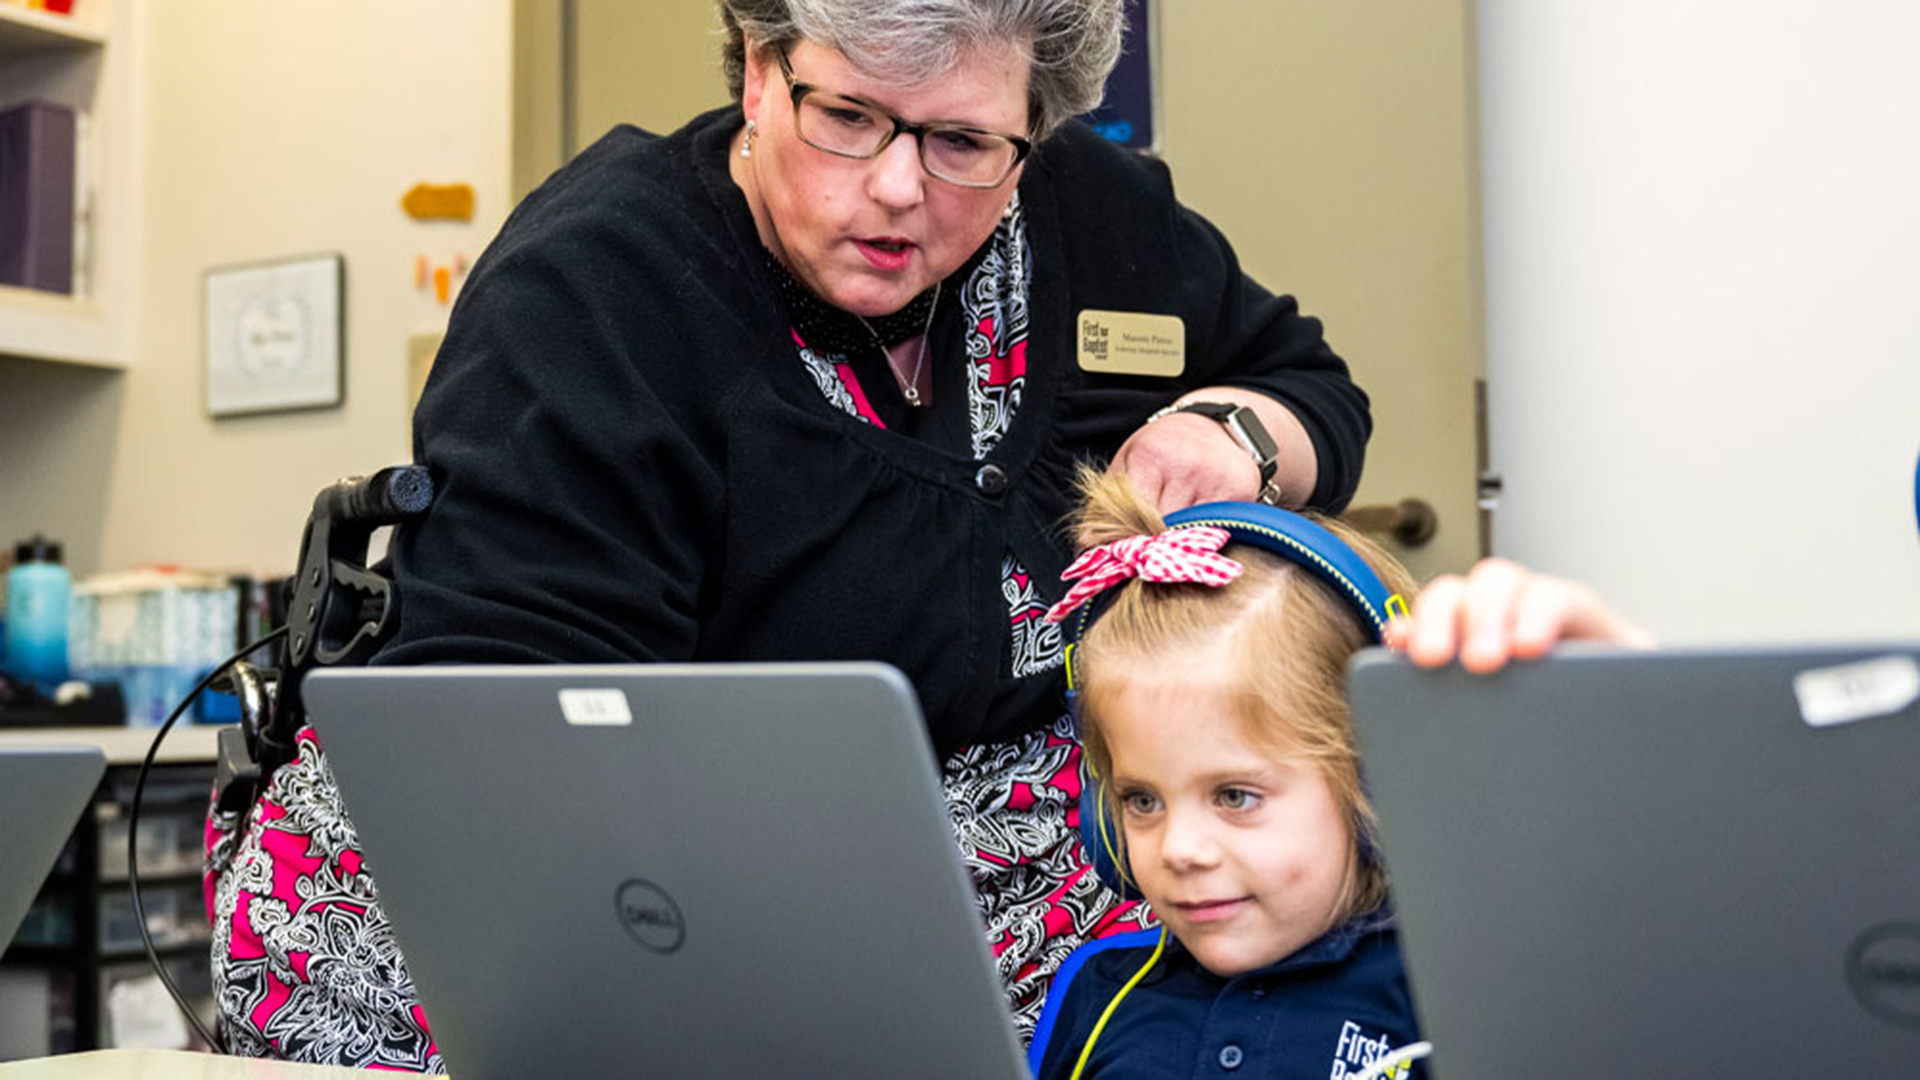 Technology classes at First Baptist Academy